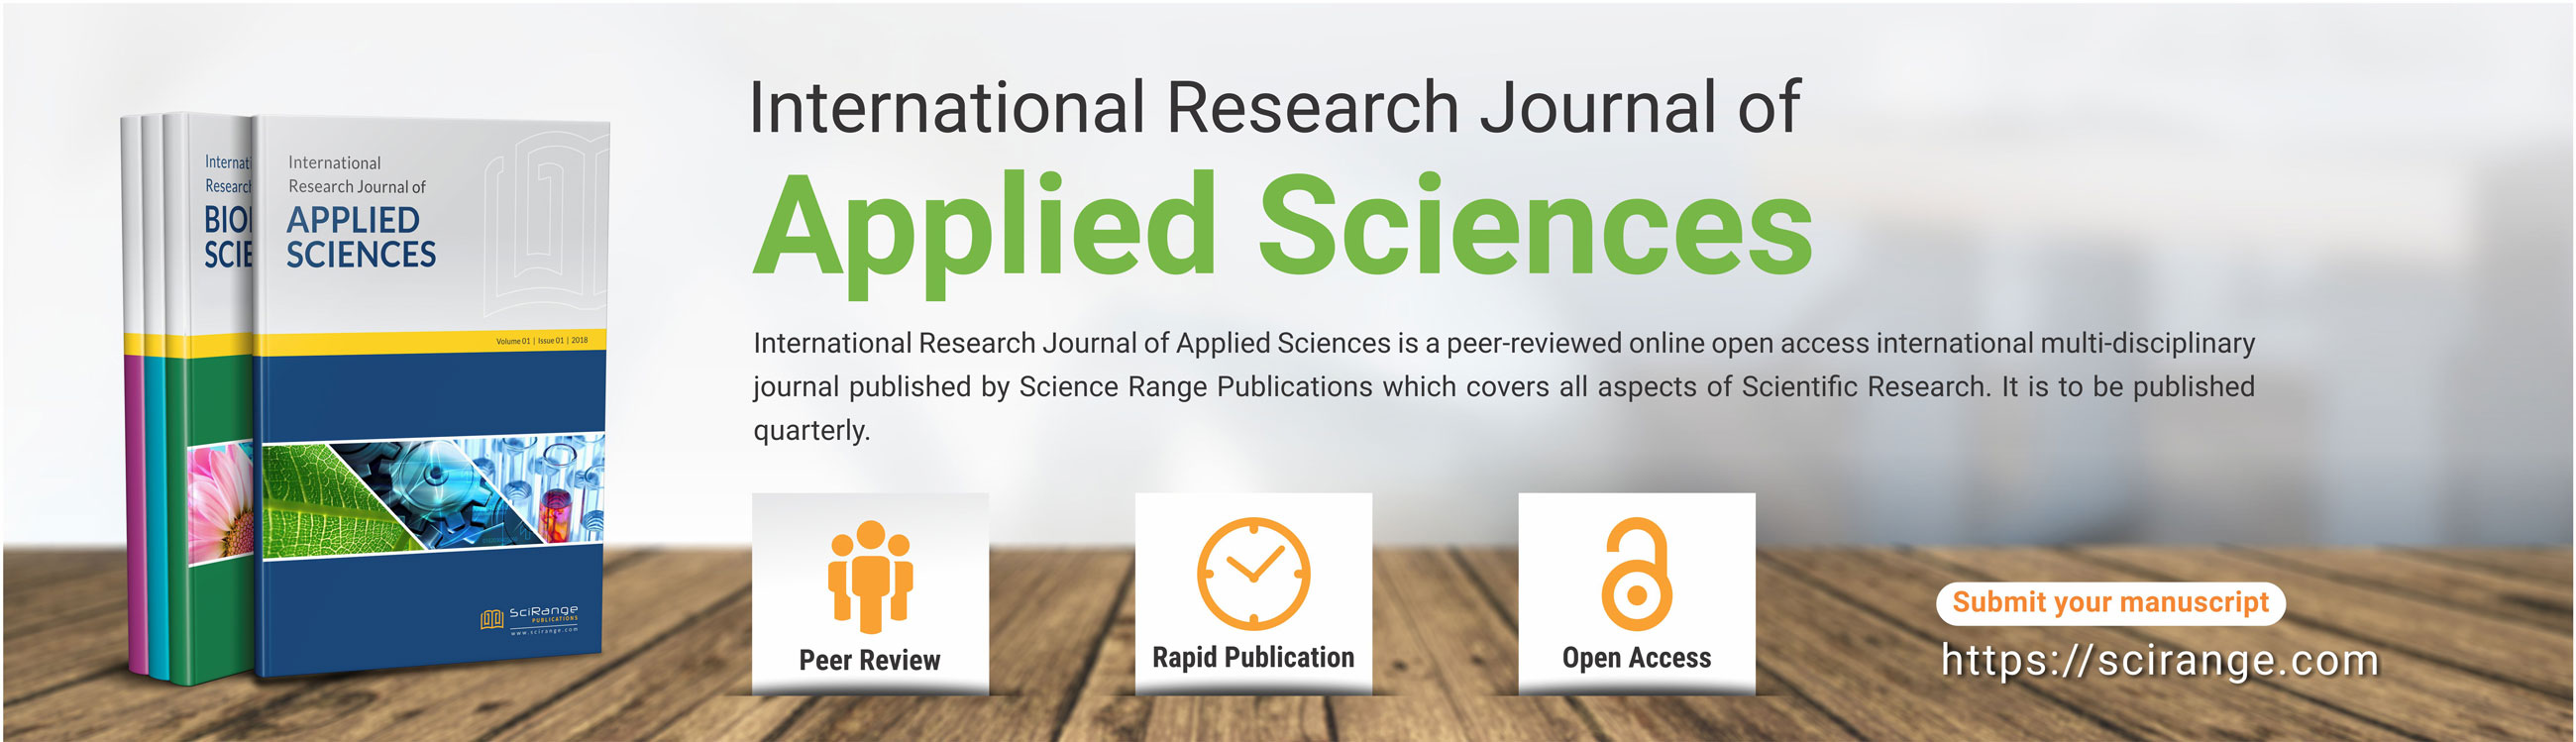 International Research Journal of Applied Sciences